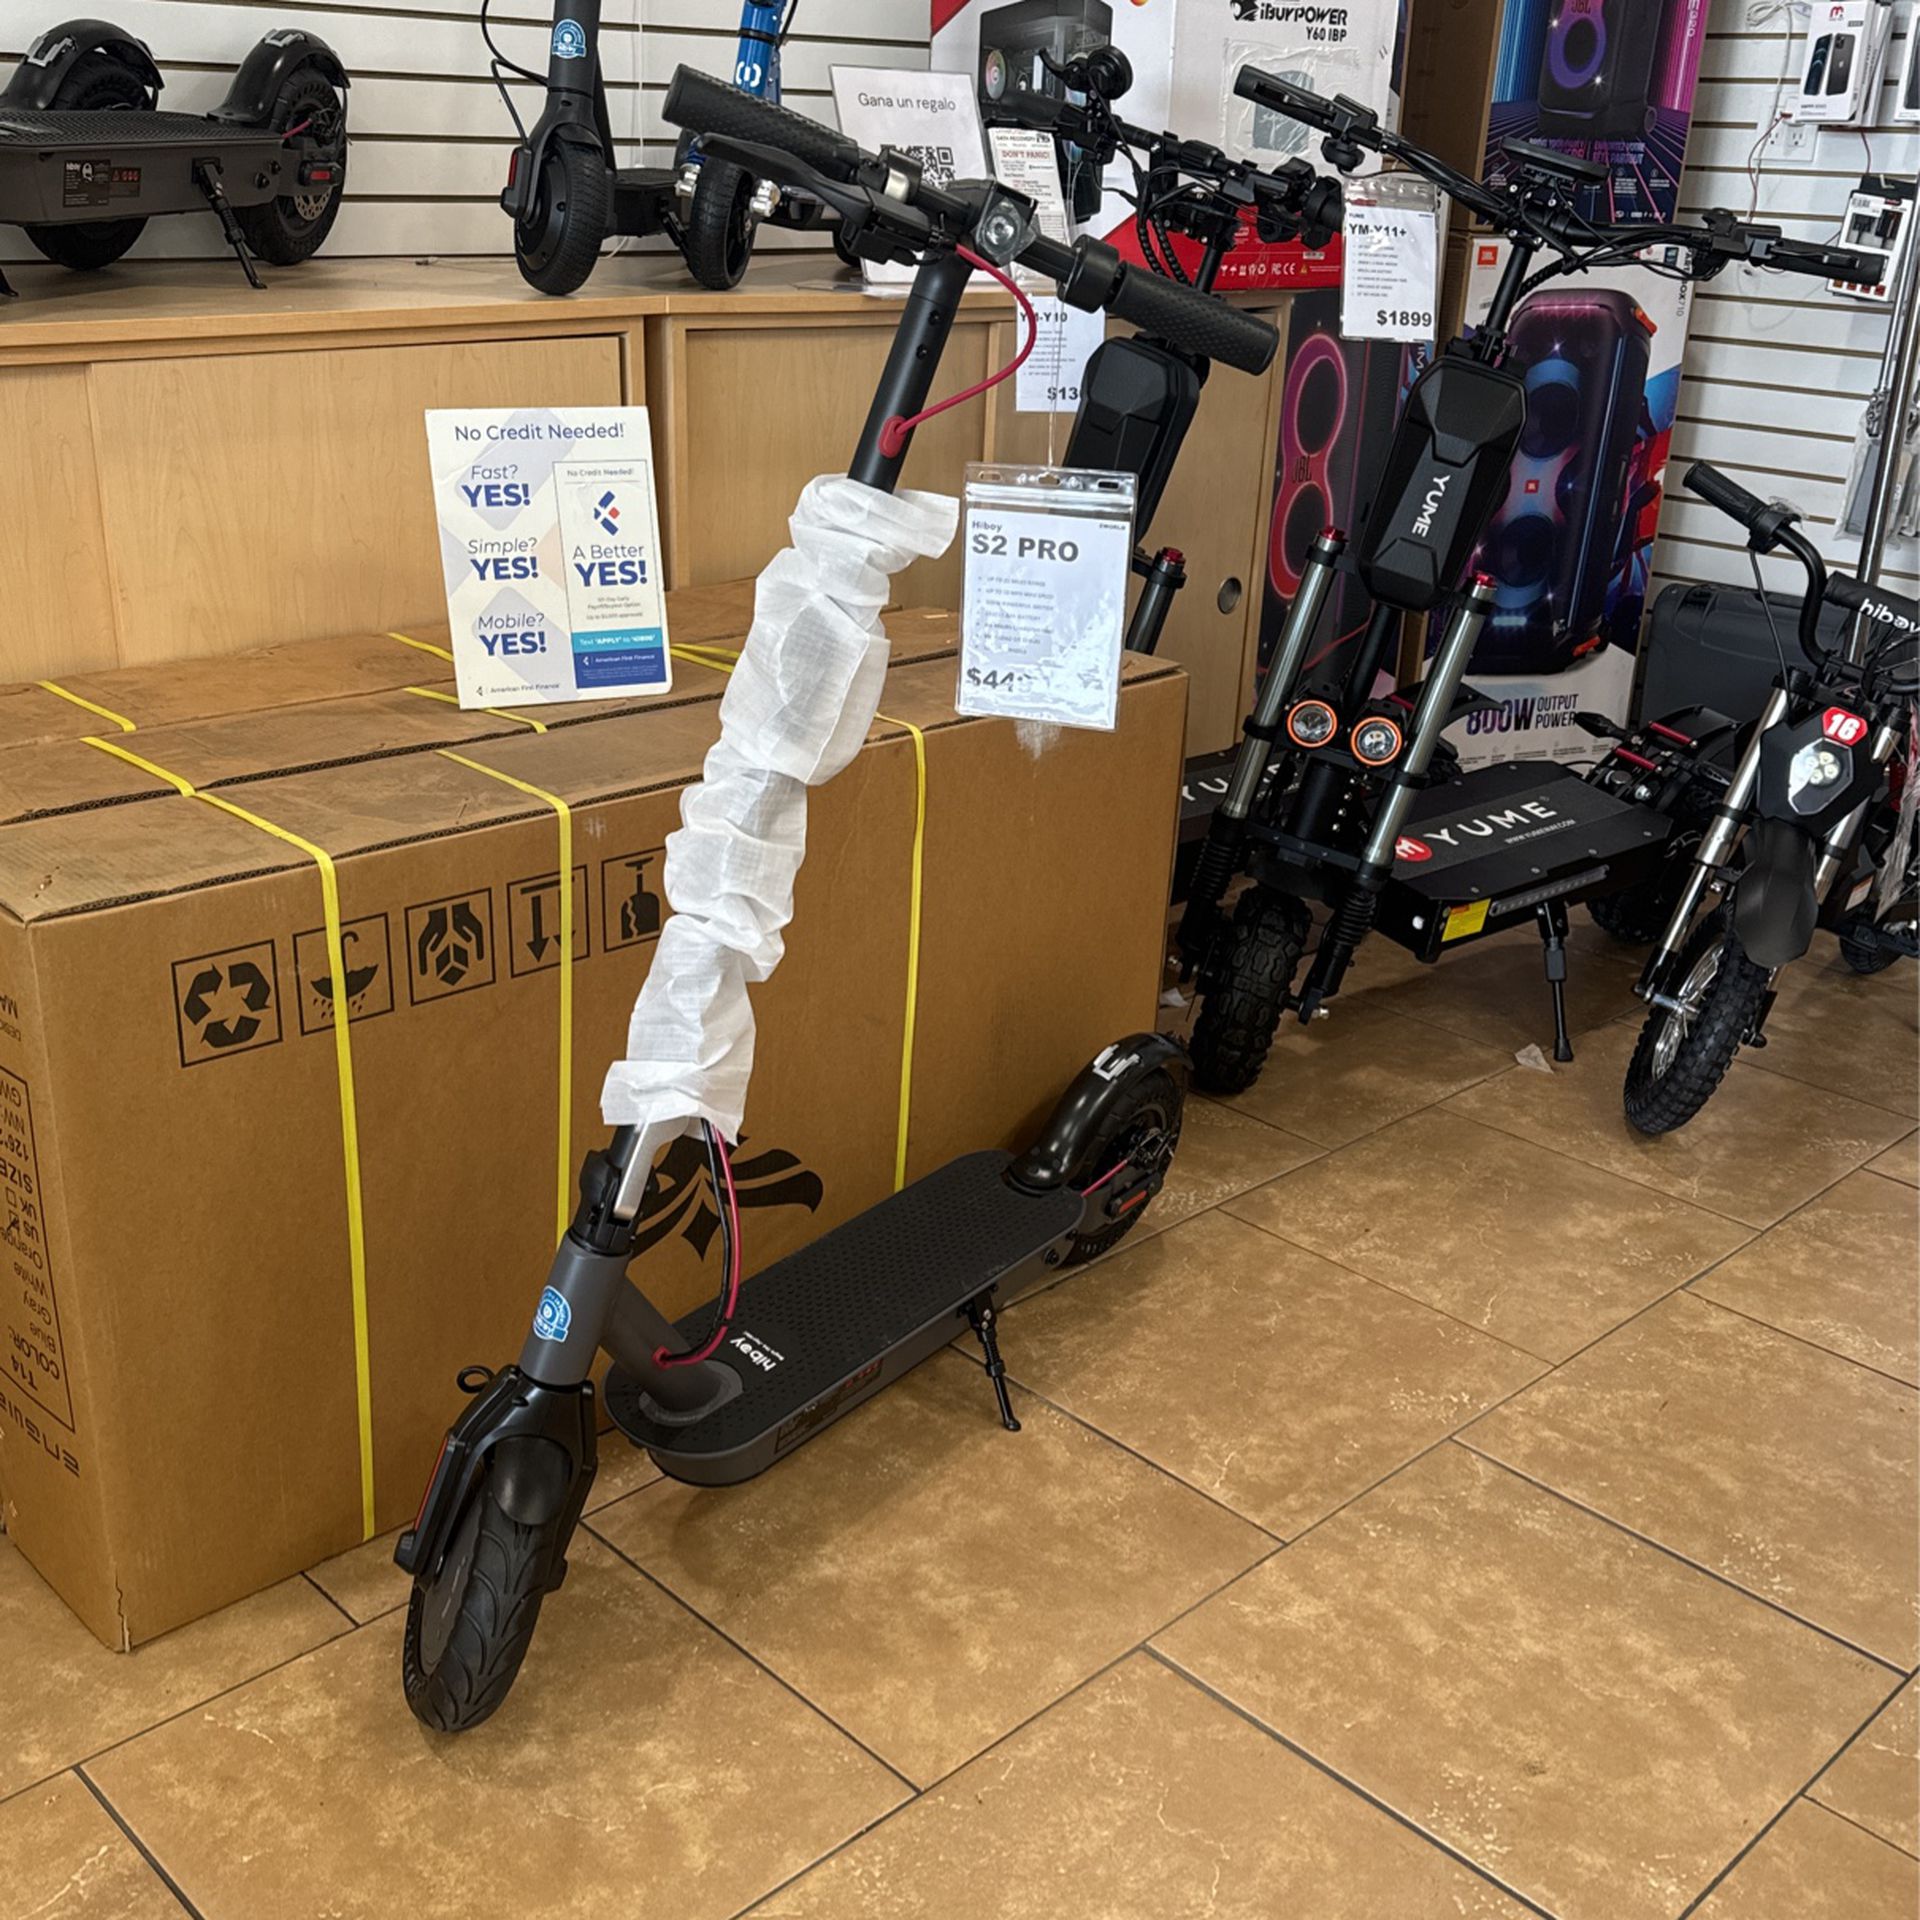 New Hiboy Electric Scooter S2 Pro ( Payments Available)